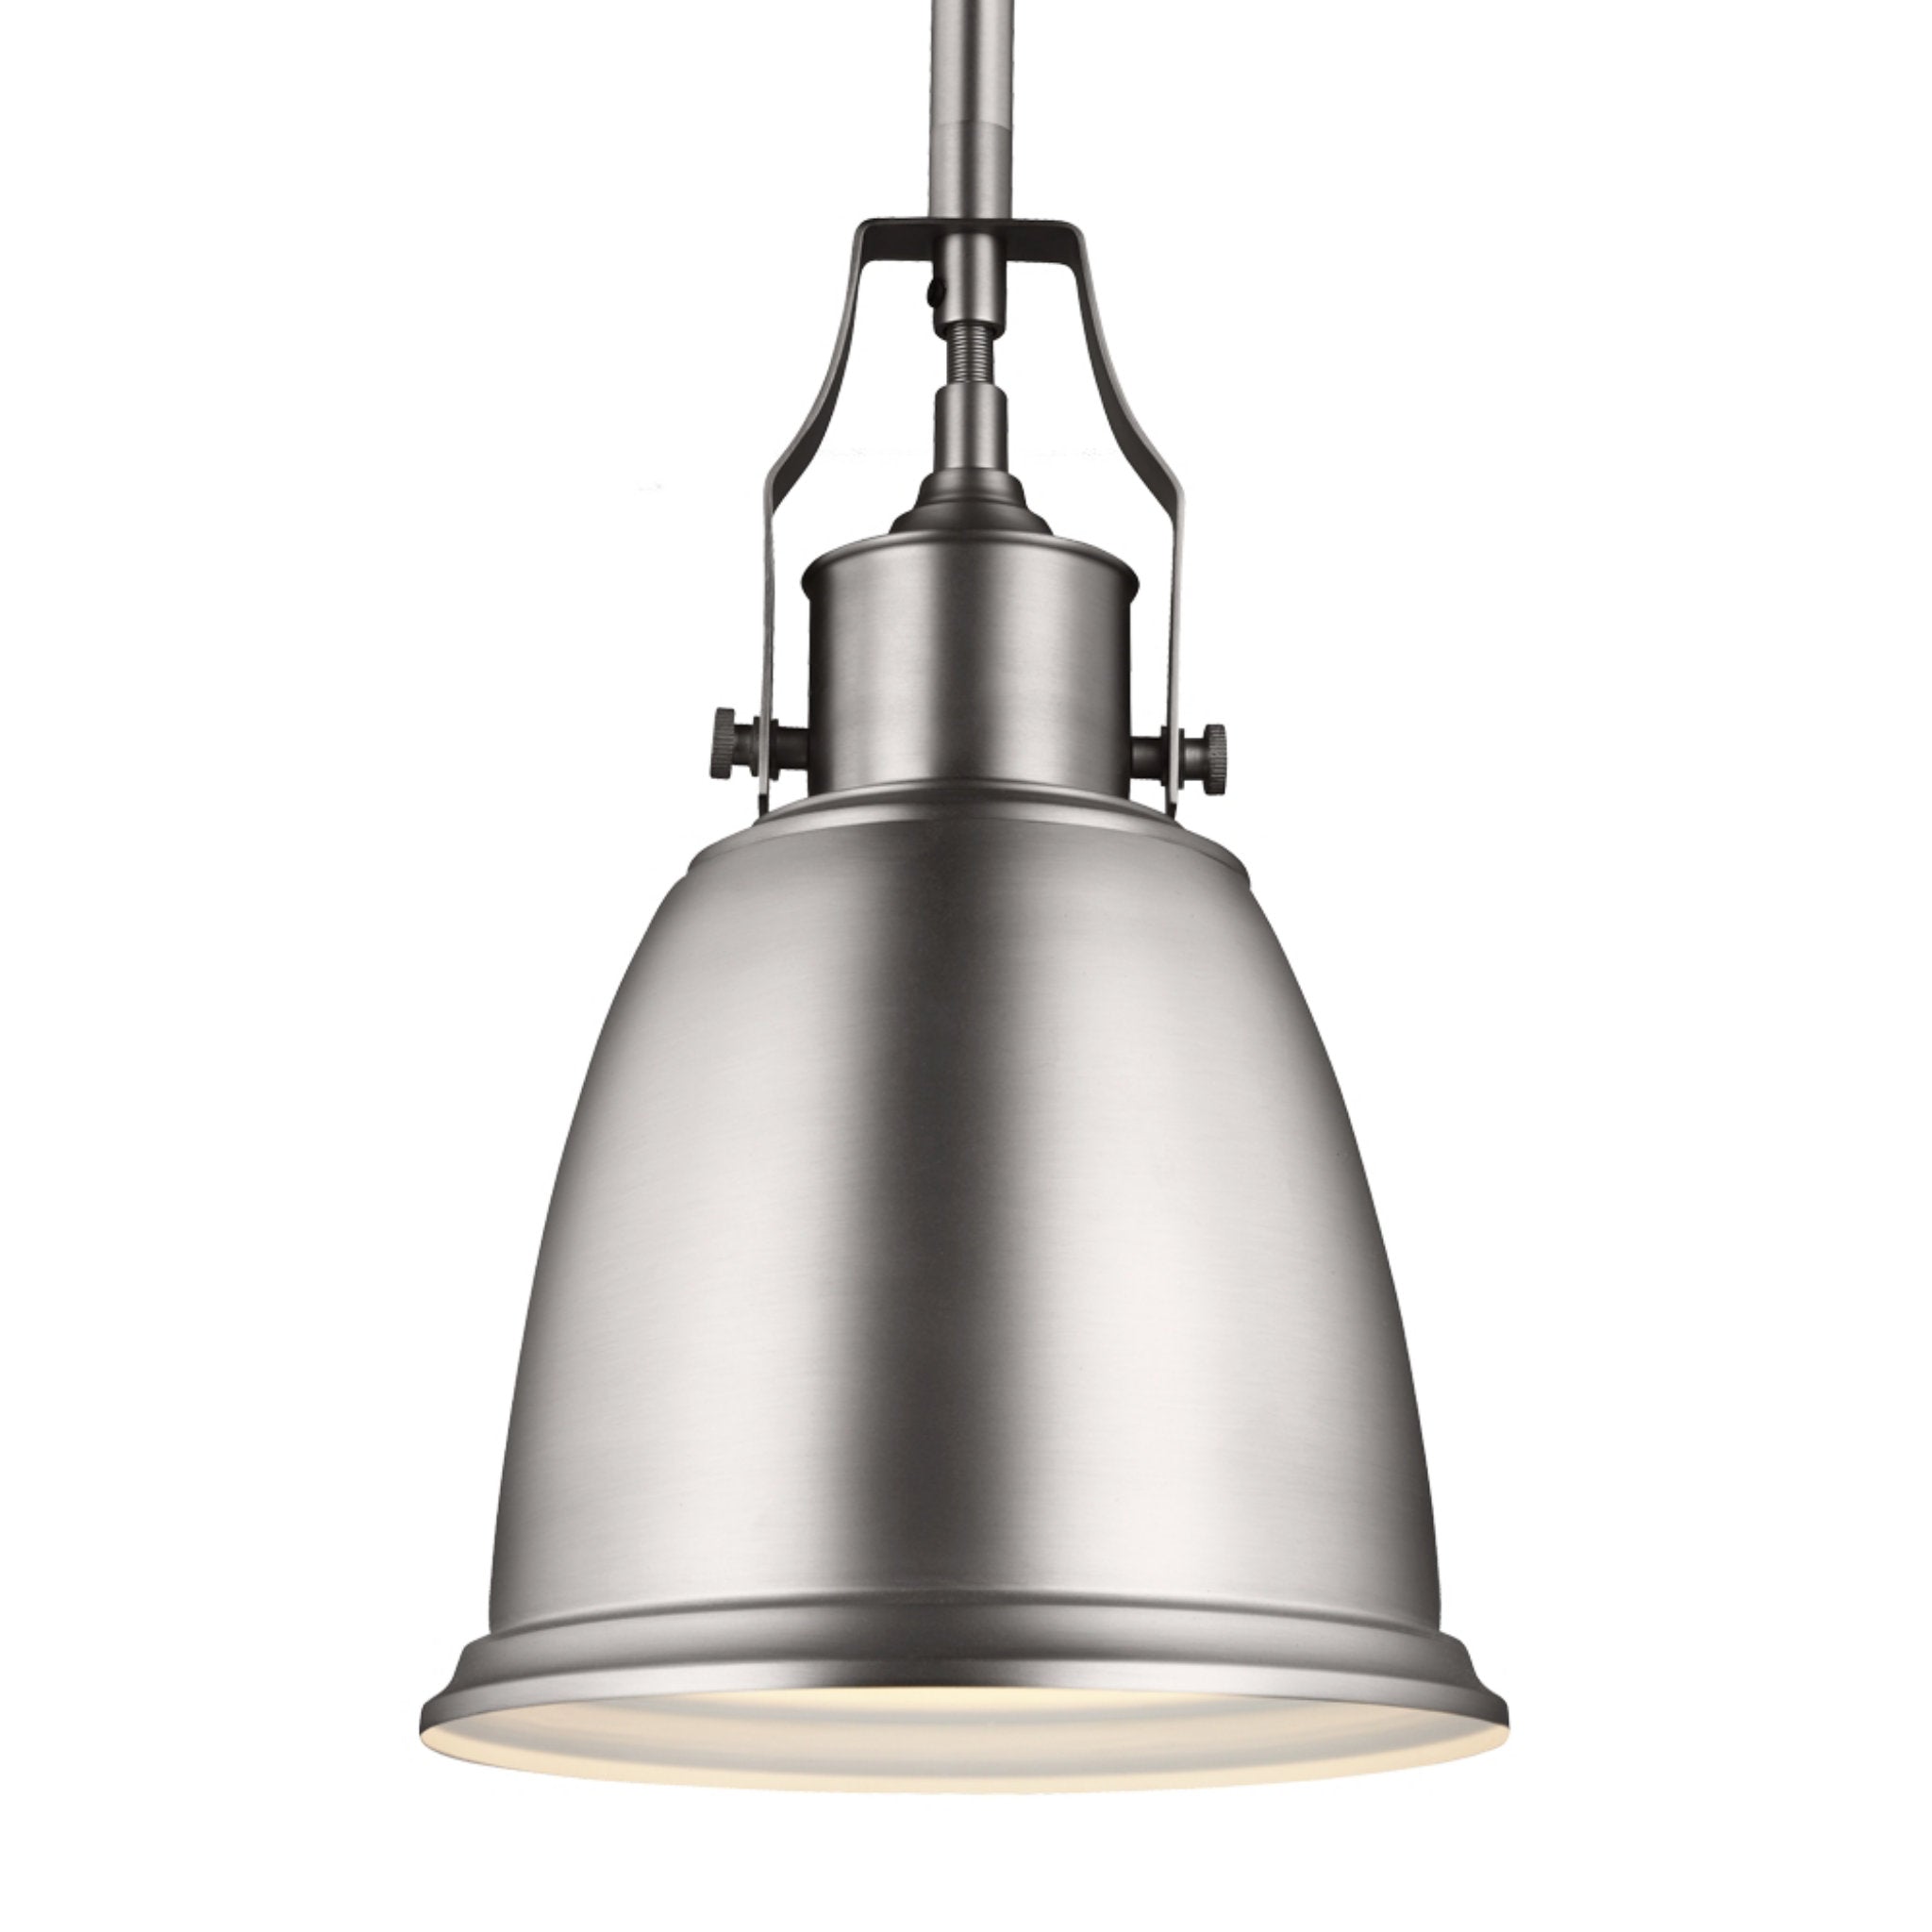 Hobson Small Pendant Transitional 11.75" Height Steel Round Satin Nickel Shade in